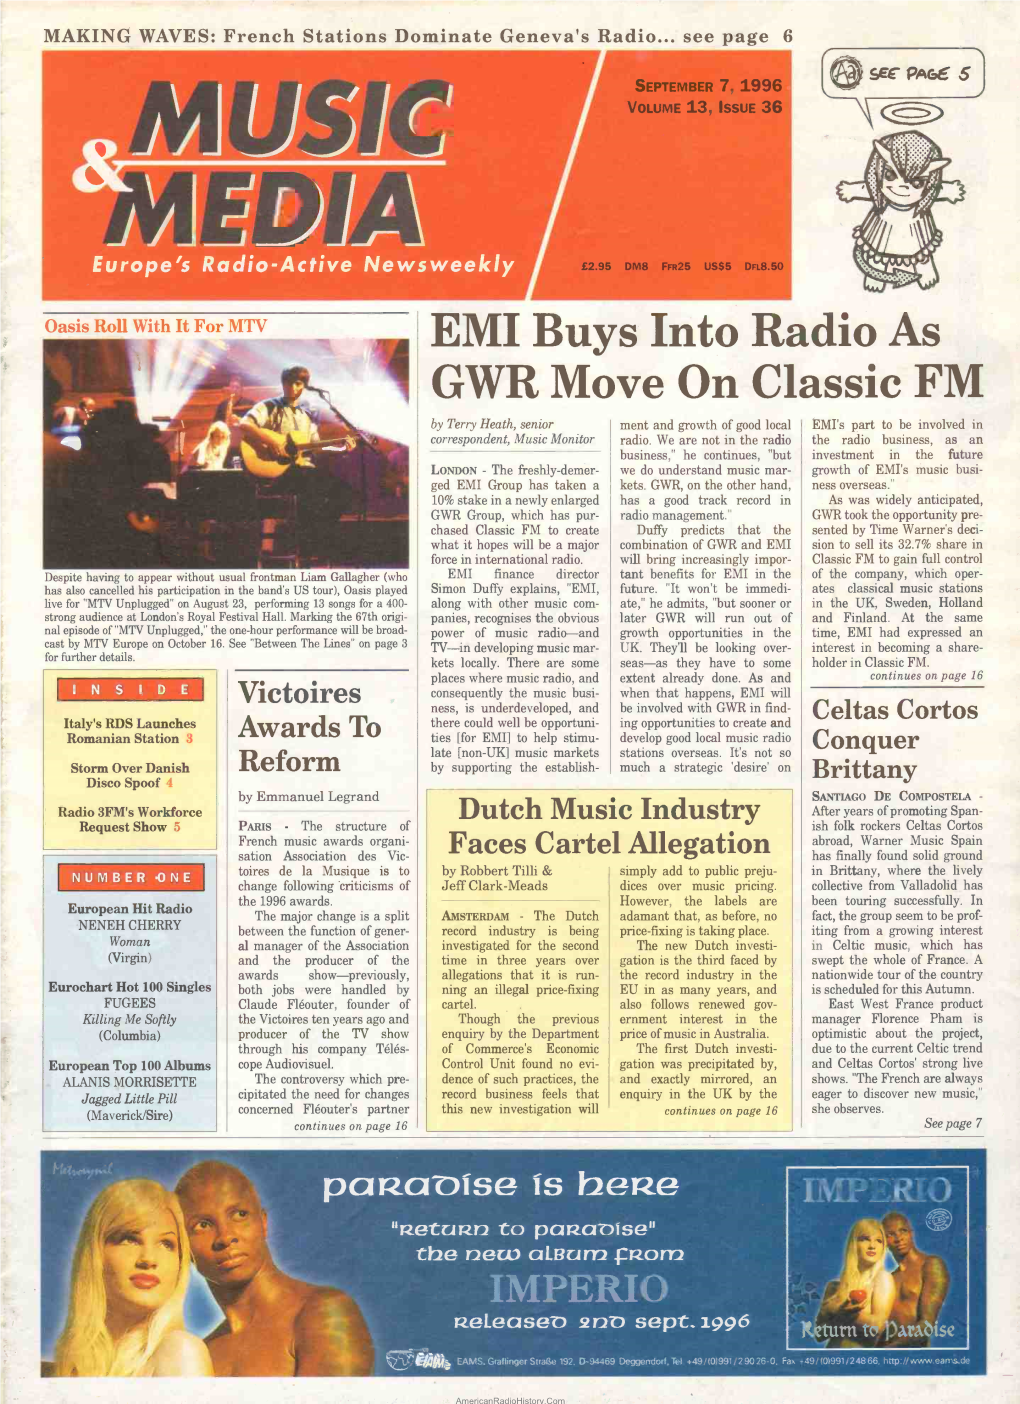 EMI Buys Into Radio As GWR Move on Classic FM by Terry Heath, Senior Ment and Growth of Good Local EMI's Part to Be Involved in Correspondent, Music Monitor Radio